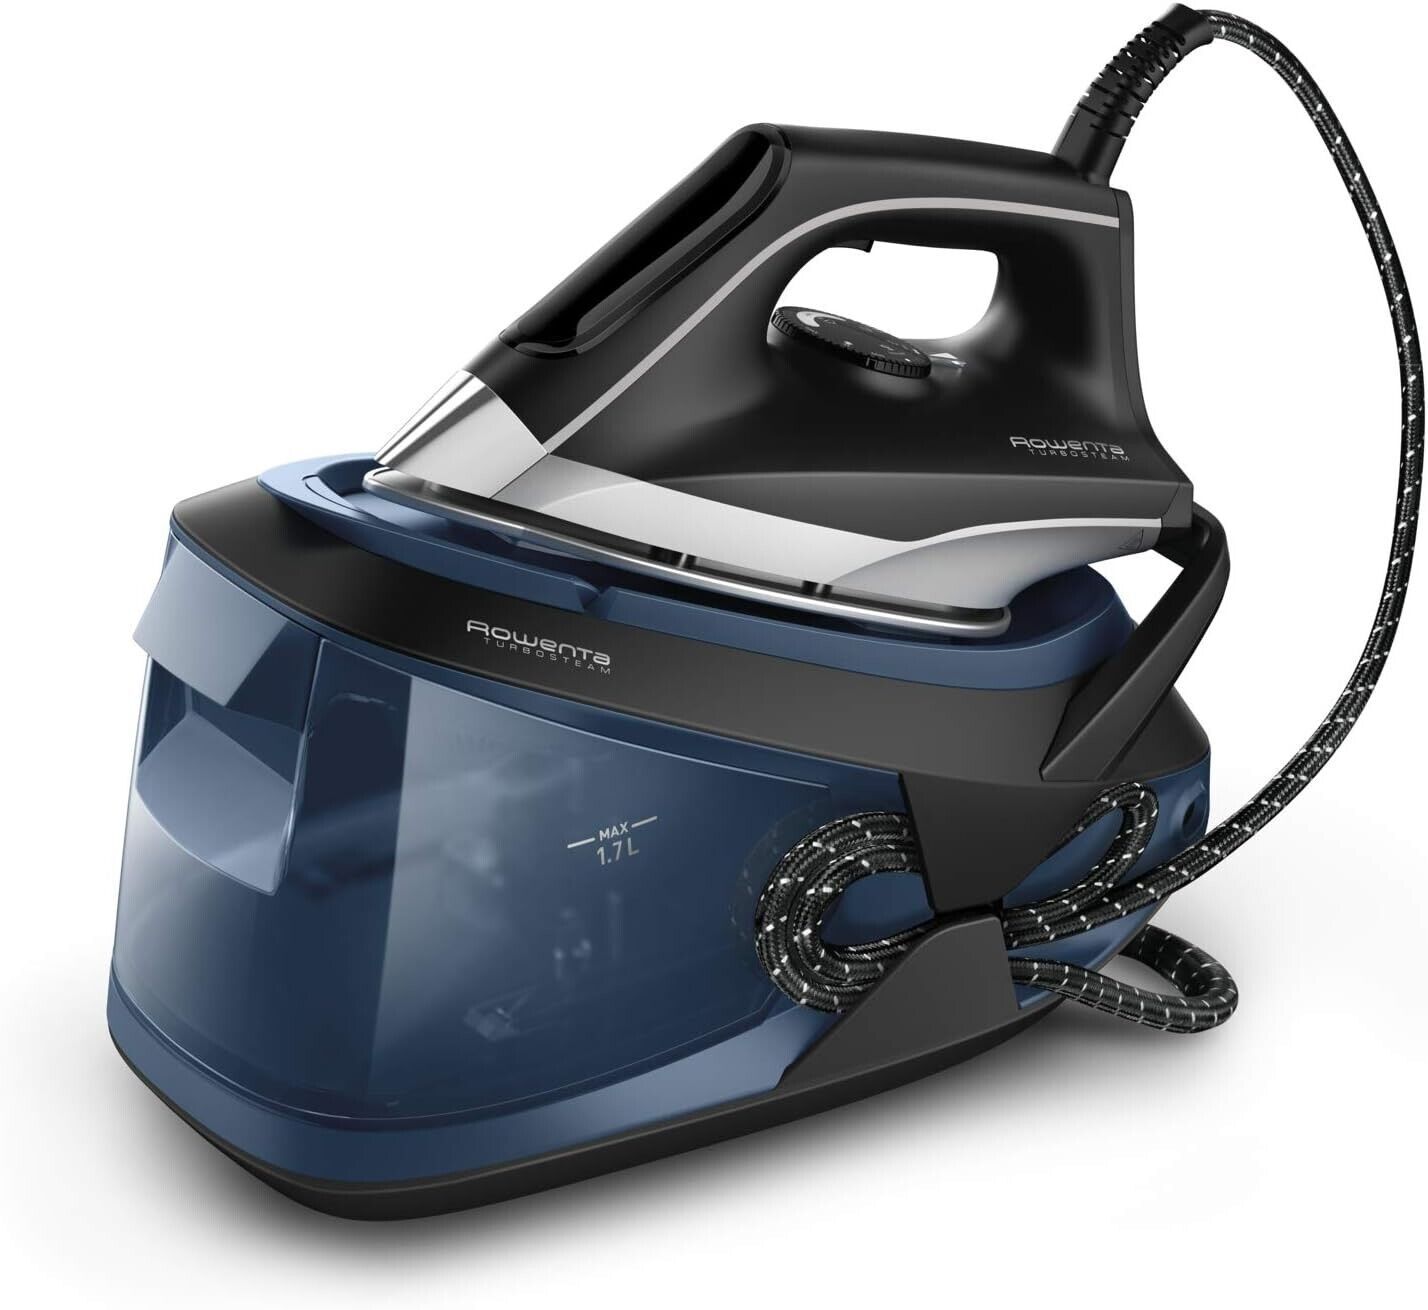 Primary image for Rowenta Turbosteam Dual Zone VR8322 Centre Of Ironing 6.5bares, Swat Steam 370g/